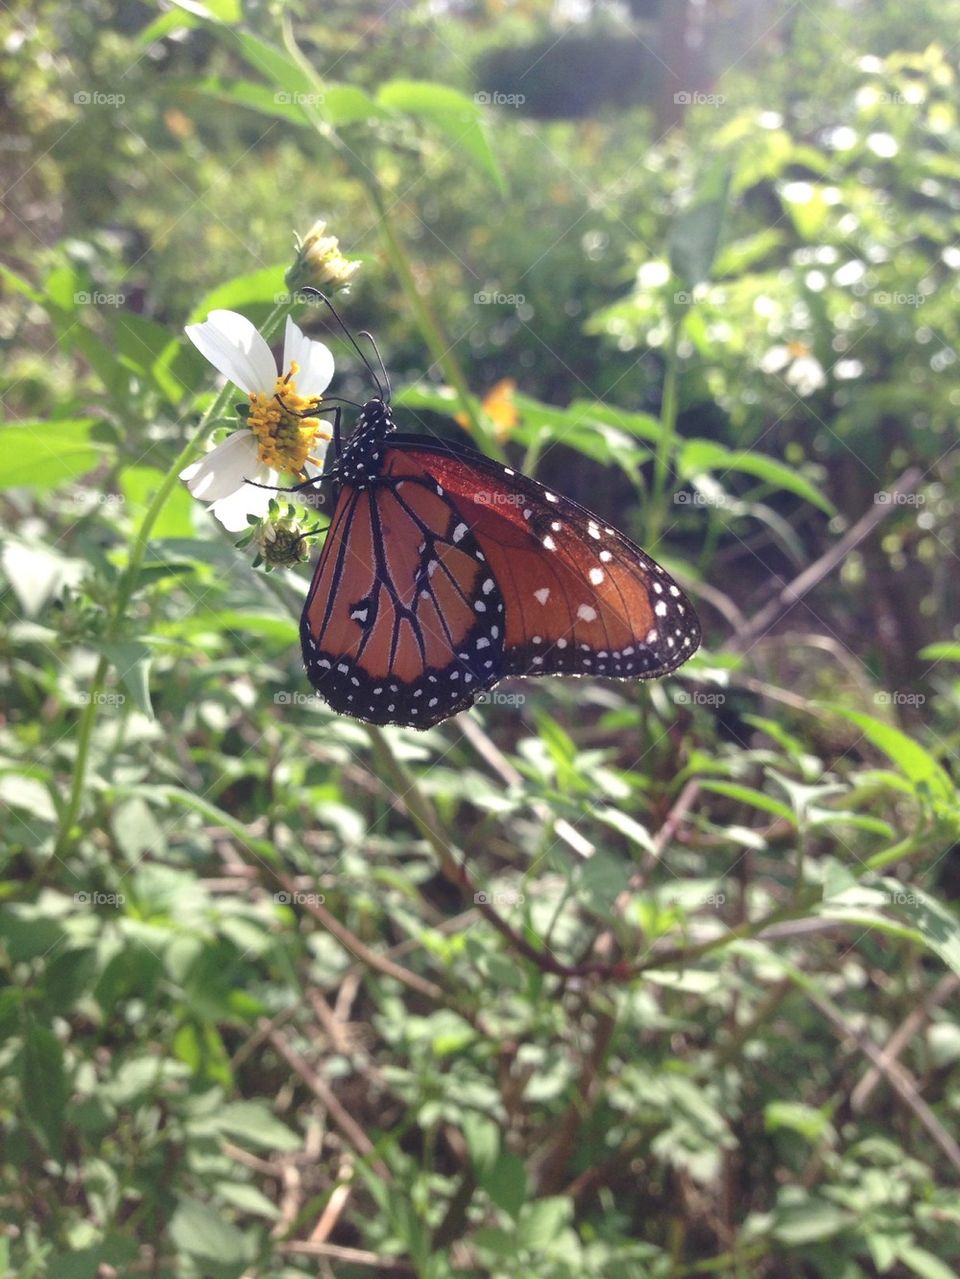 Fall butterfly in South Texas